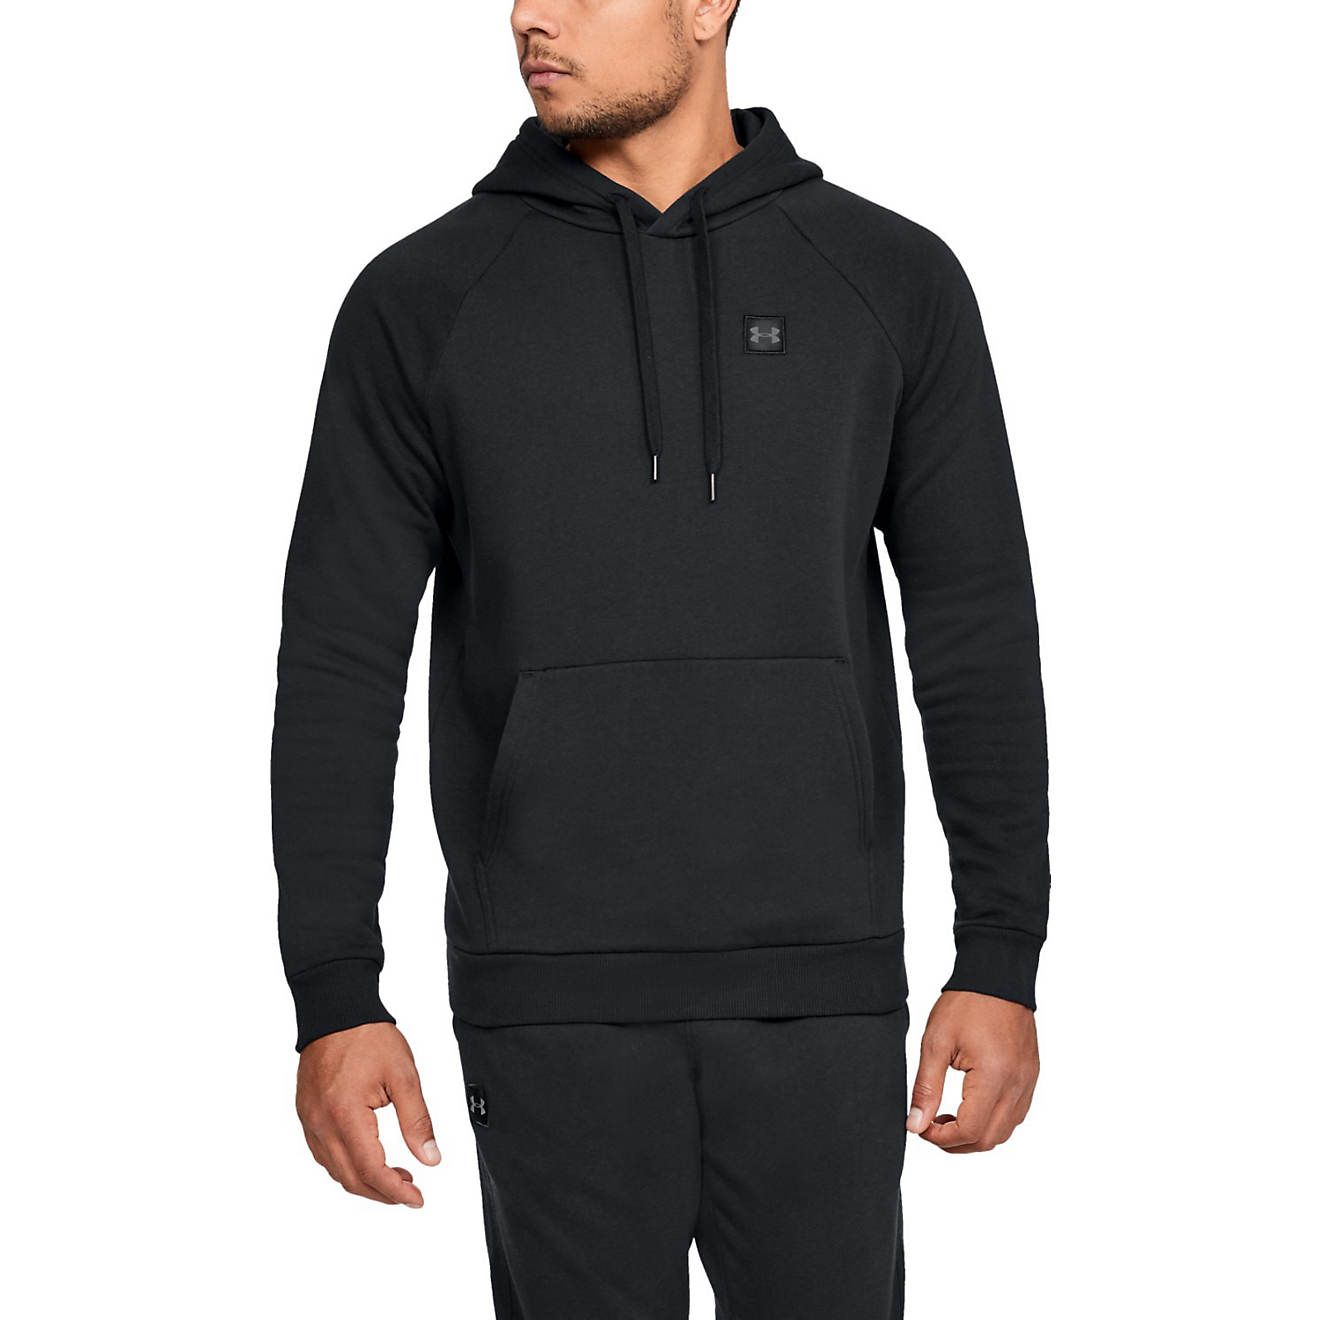 Under Armour Men's Rival Fleece Pullover Hoodie | Academy Sports + Outdoor Affiliate